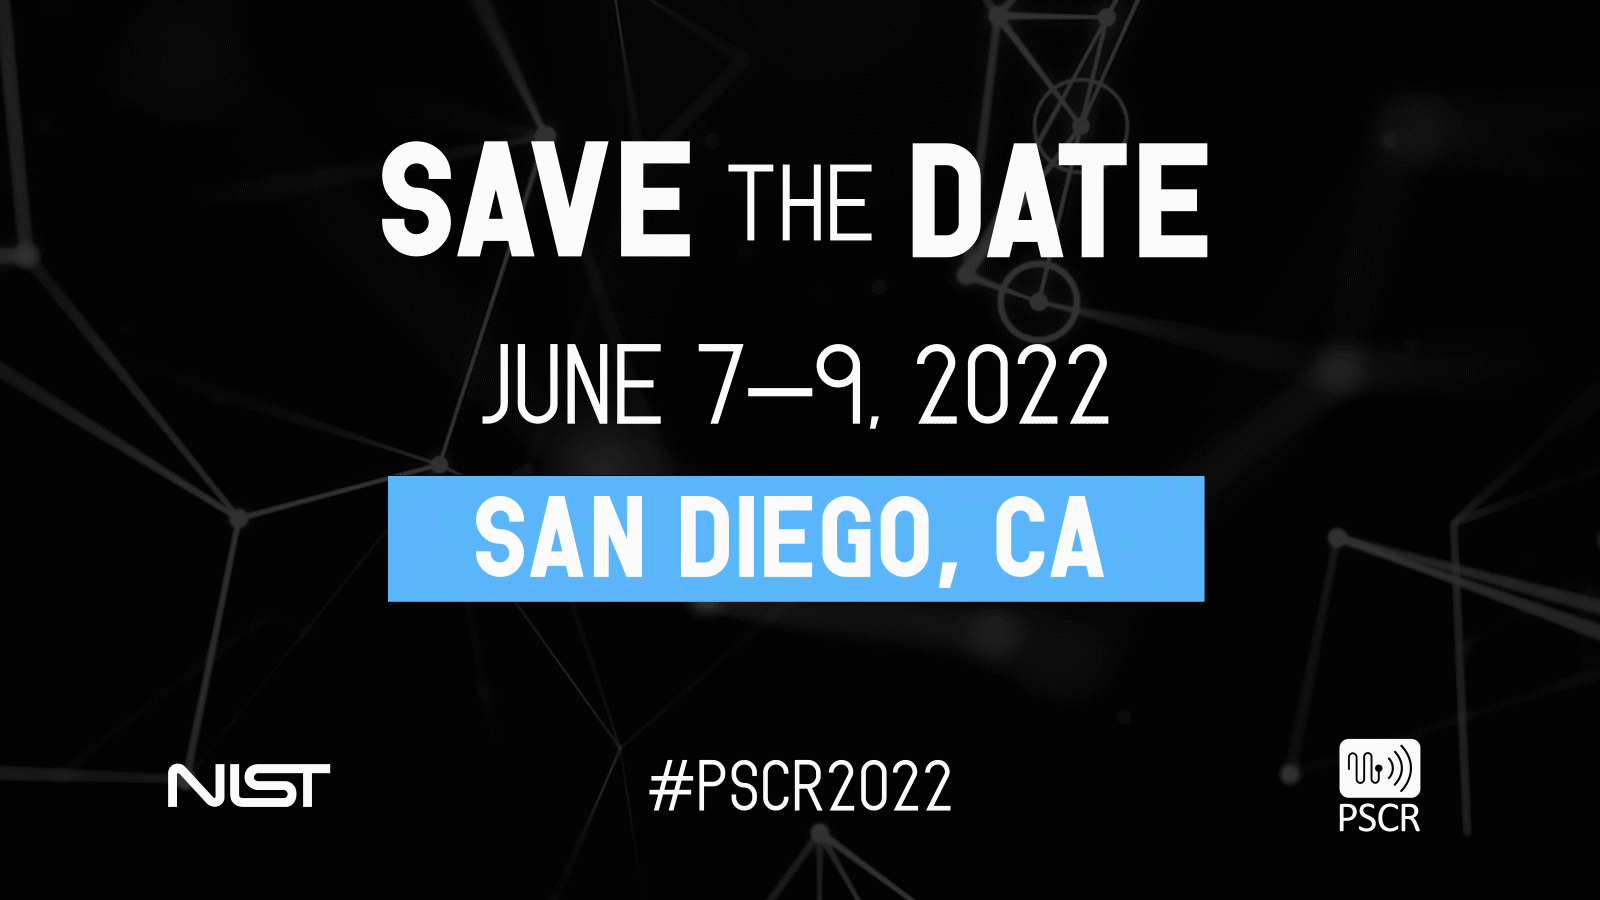 Animated motion graphic reads "Save the Date' San Diego June 7-9 PSCR 2022